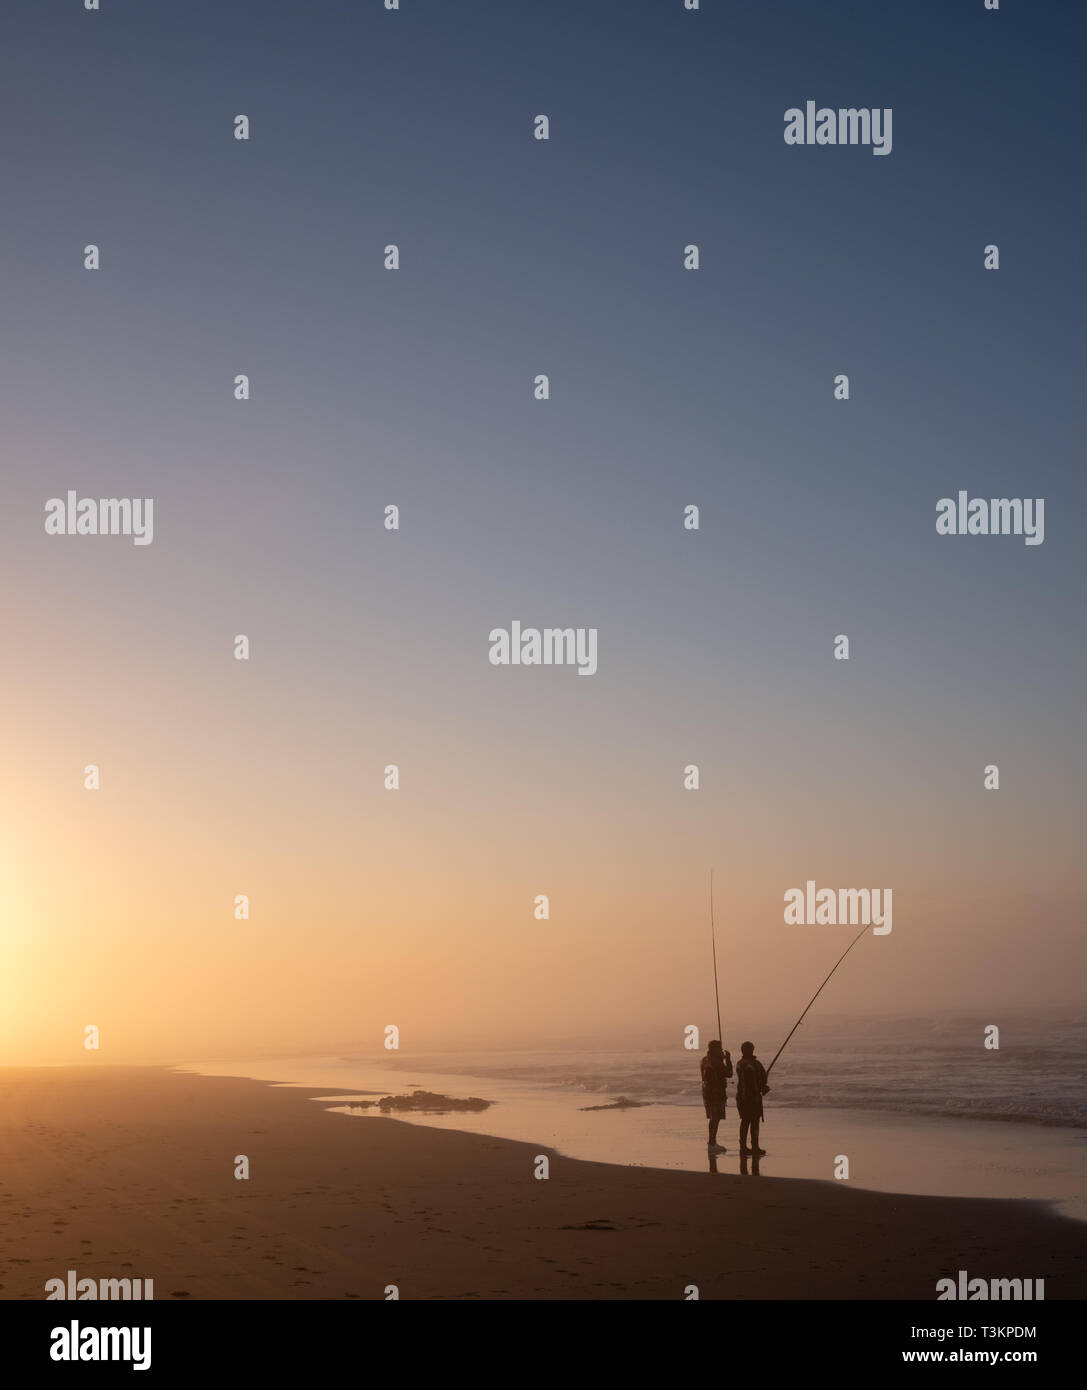 Morgan Bay beach at sunset with people fishing in silhouette, Wild Coast, Eastern Cape, South Africa. Stock Photo